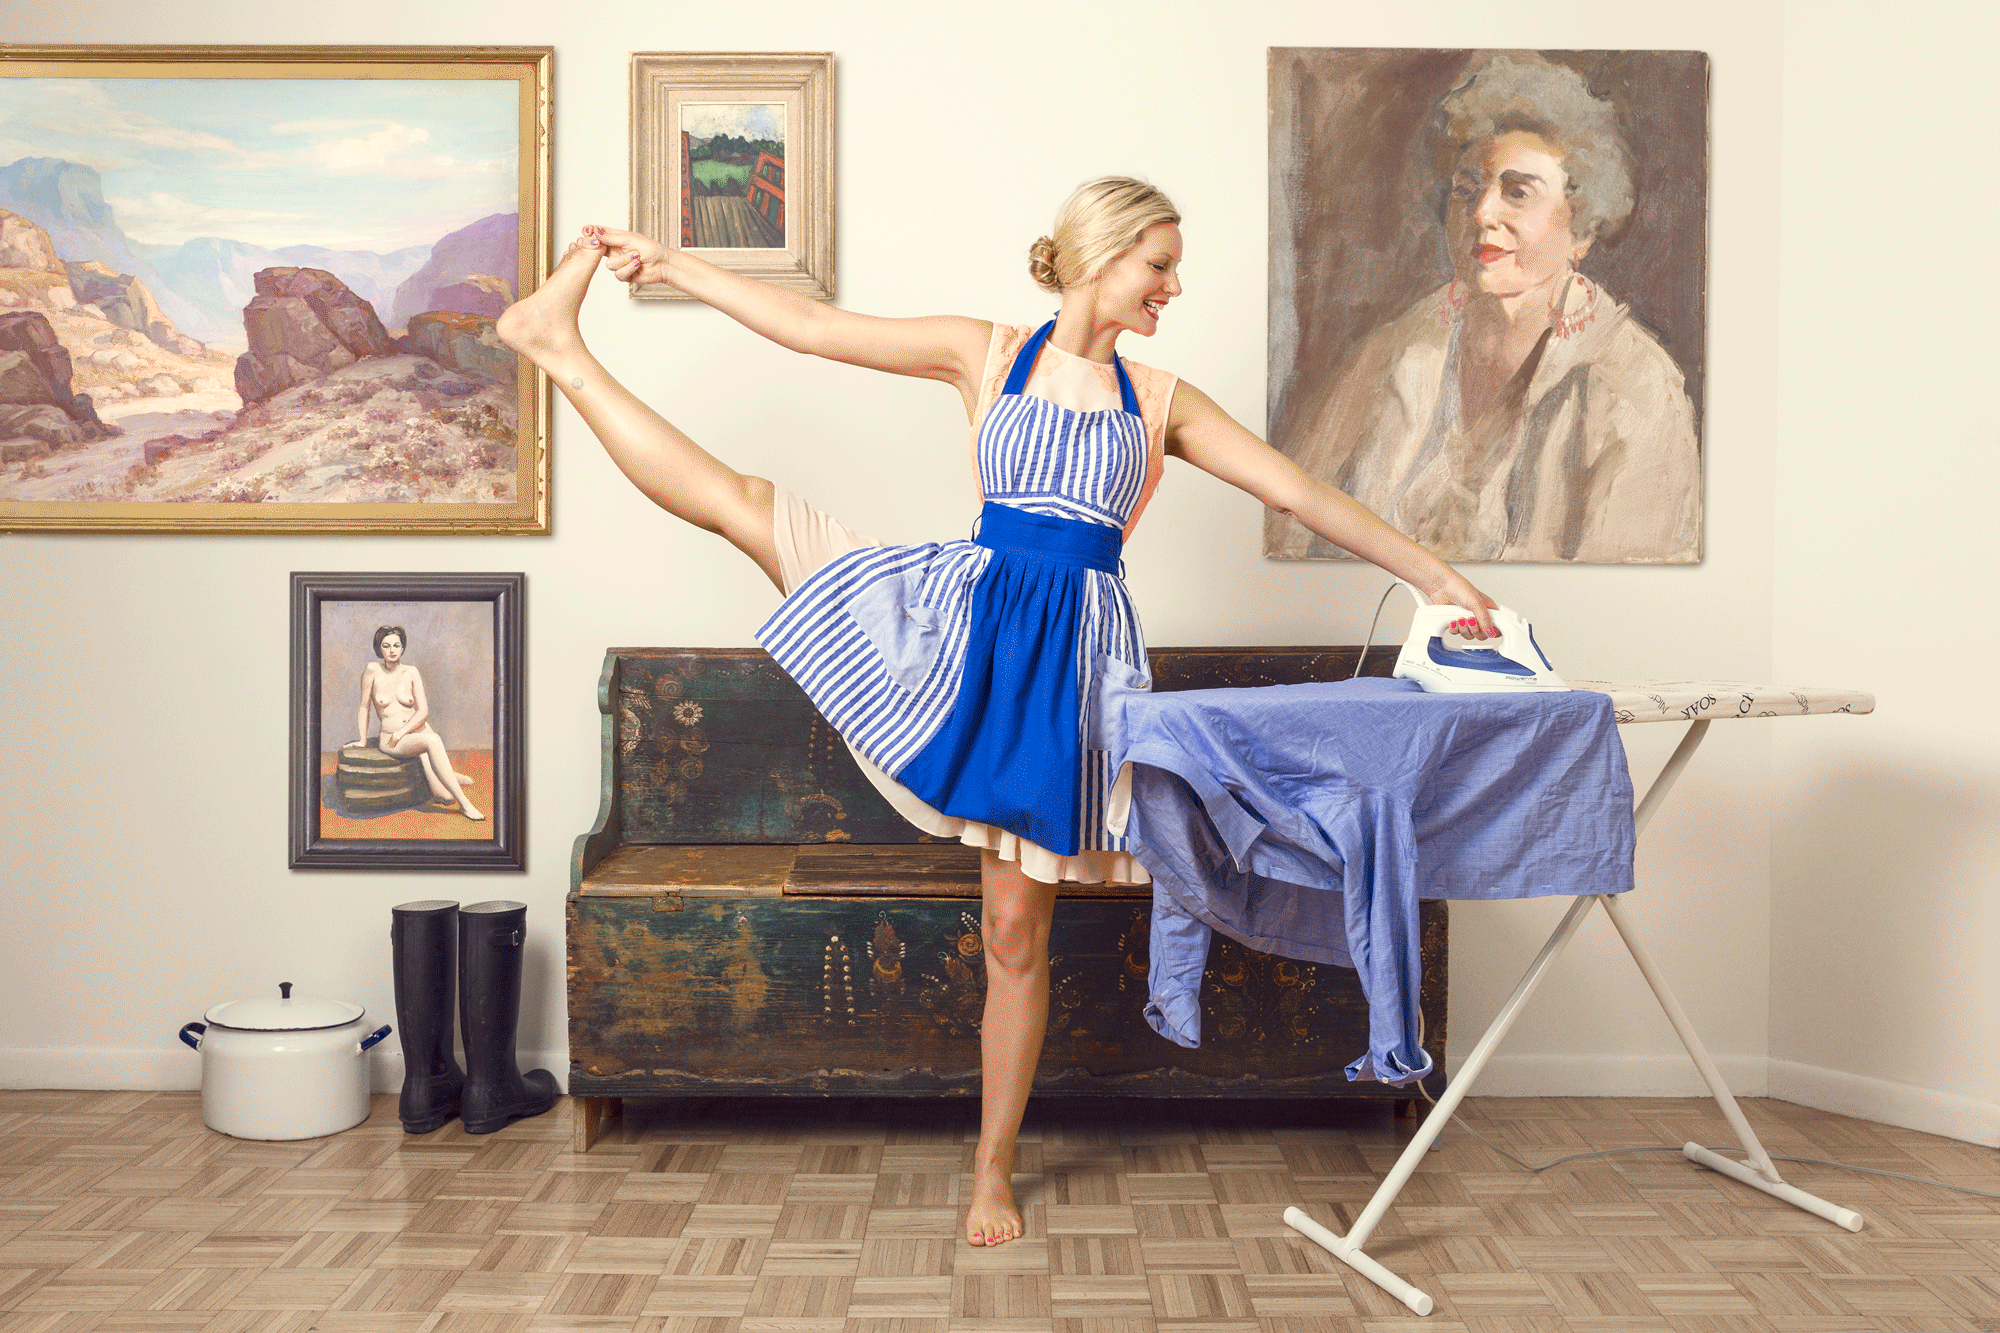 whimsical animated GIF of woman in yoga pose ironing a shirt by creative portrait photographer Hanna Agar